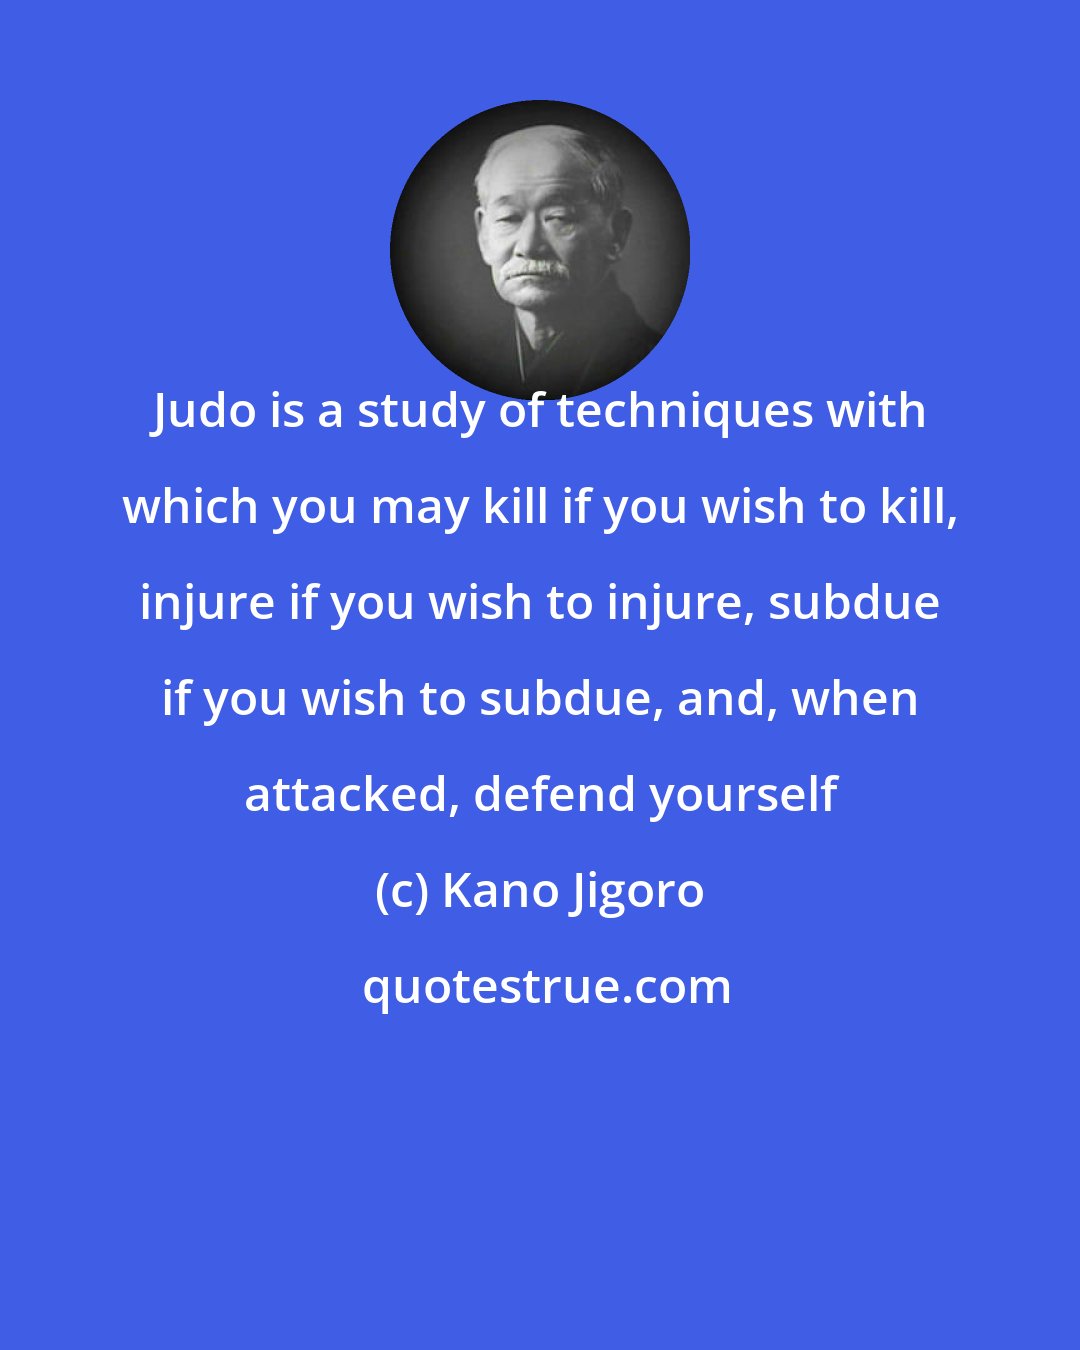 Kano Jigoro: Judo is a study of techniques with which you may kill if you wish to kill, injure if you wish to injure, subdue if you wish to subdue, and, when attacked, defend yourself